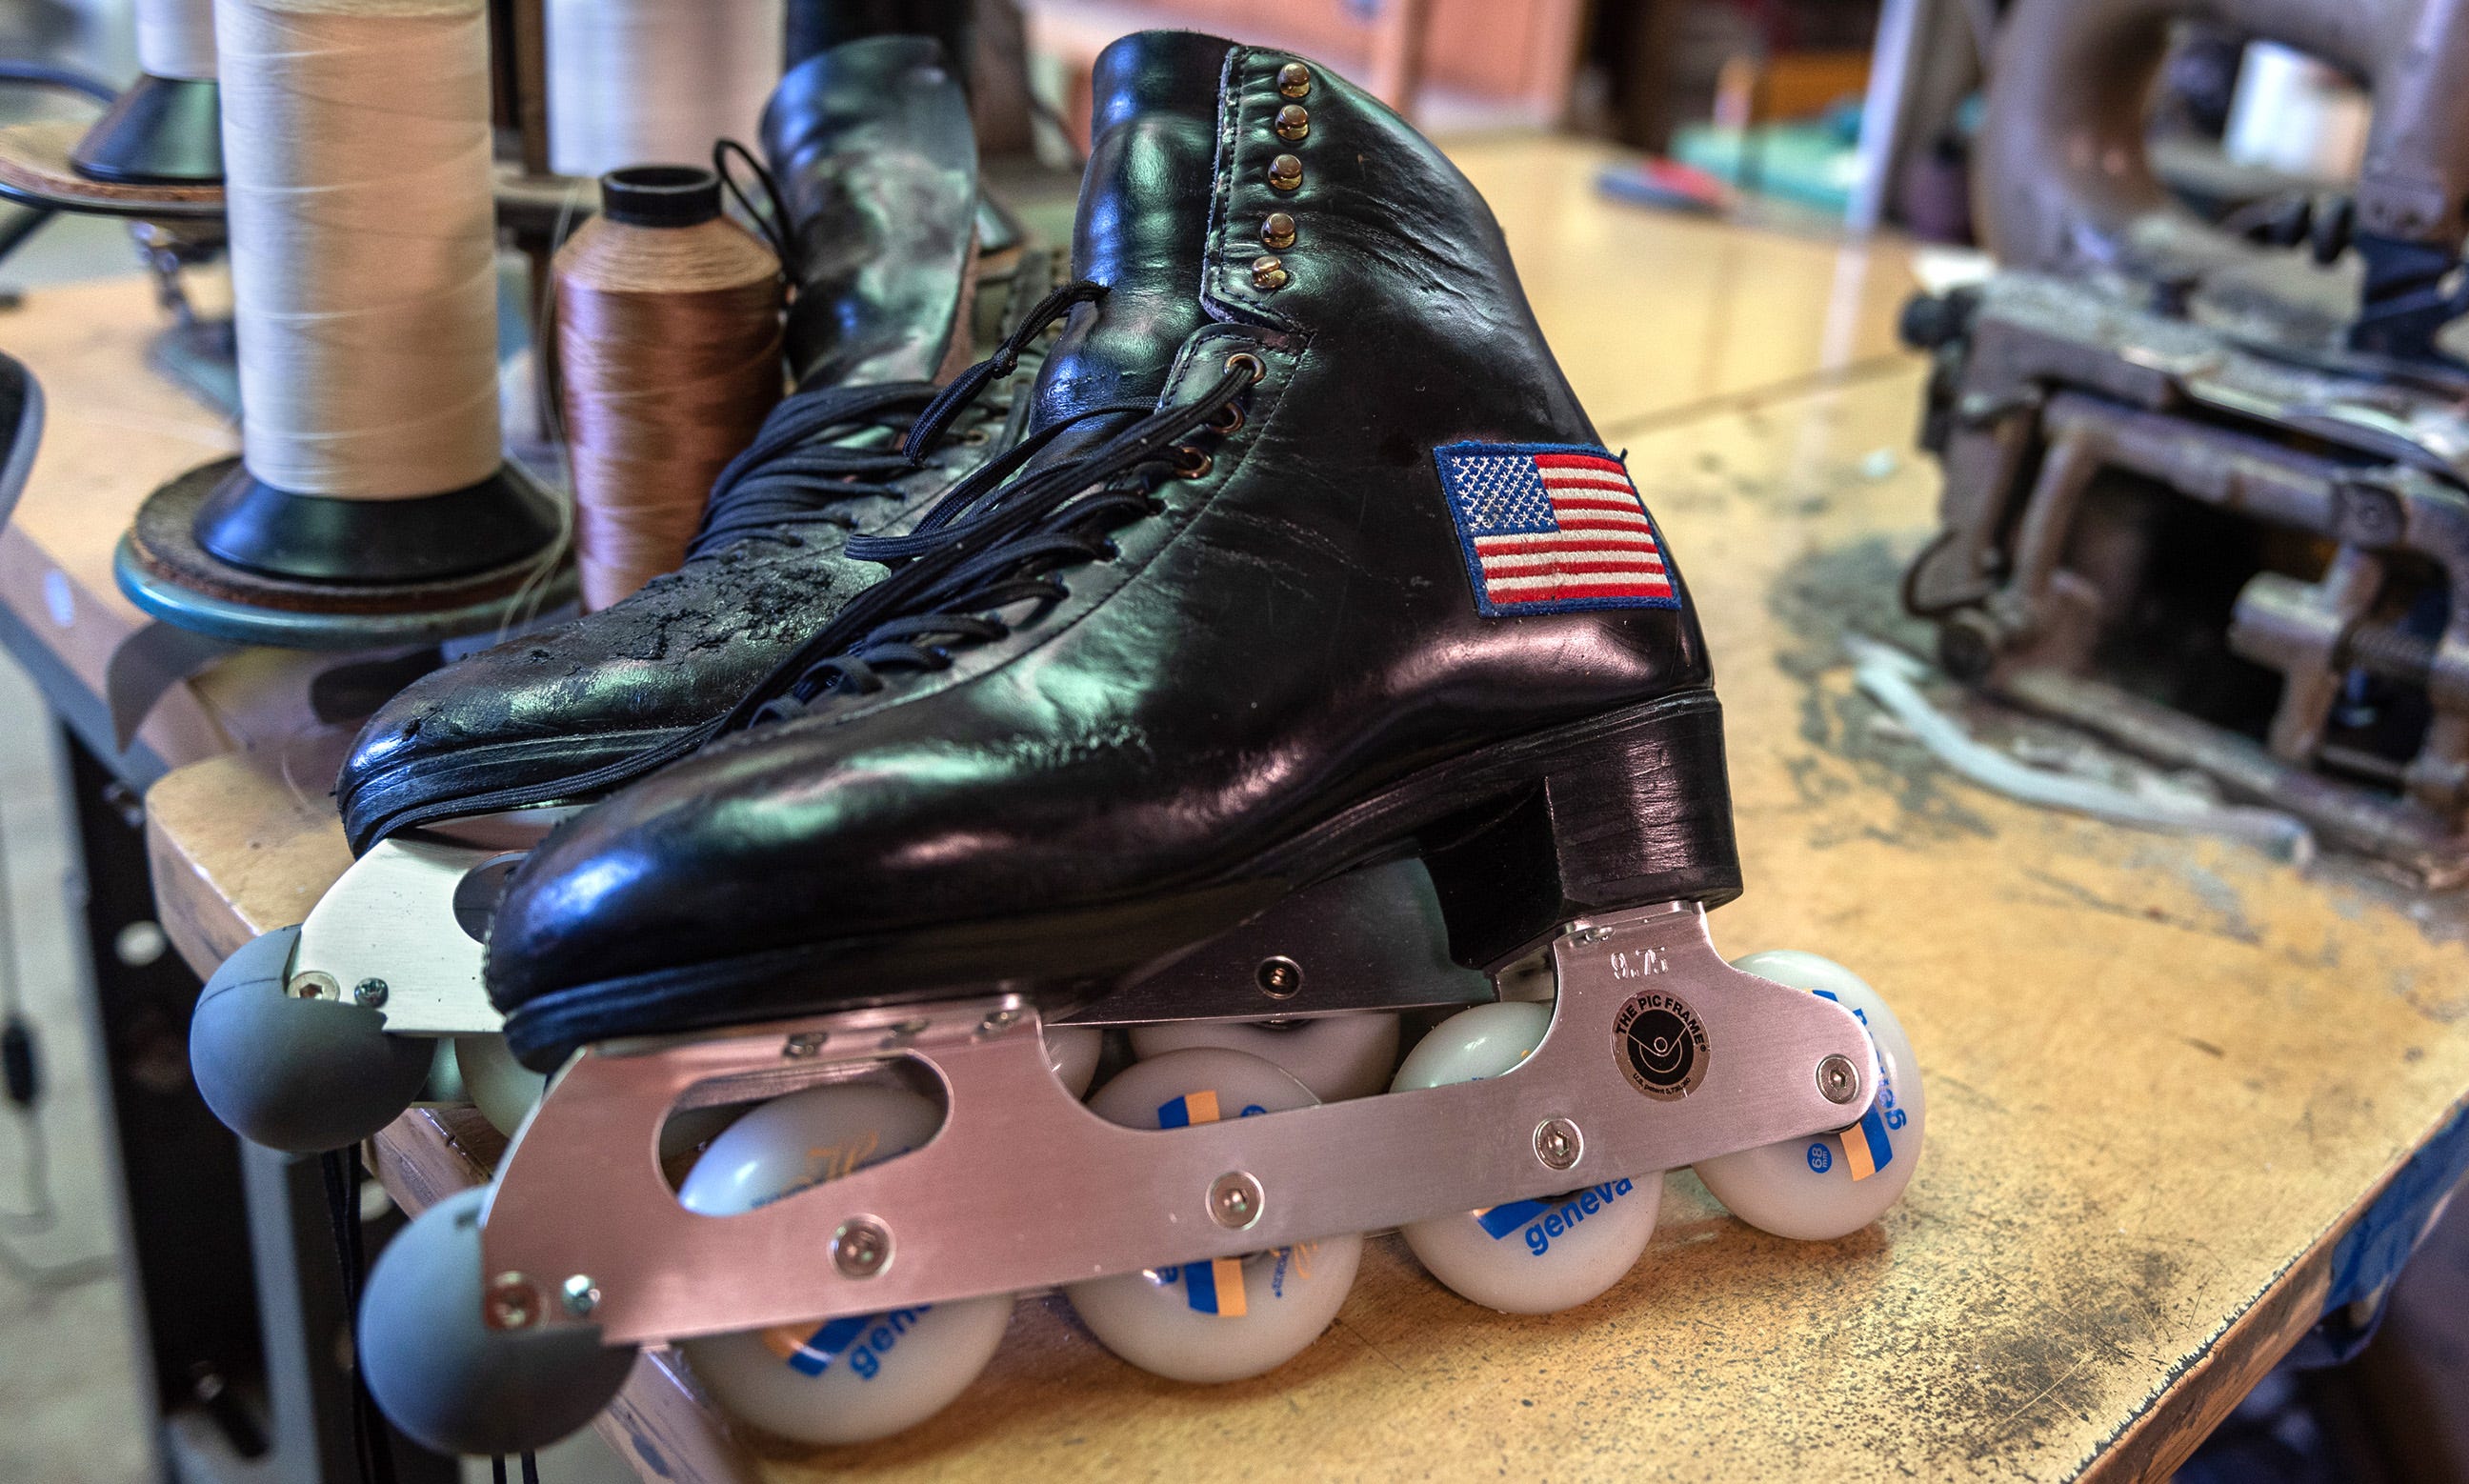 The worlds best ice skates are made in…San Carlos? Behind the scenes at Harlick Skates